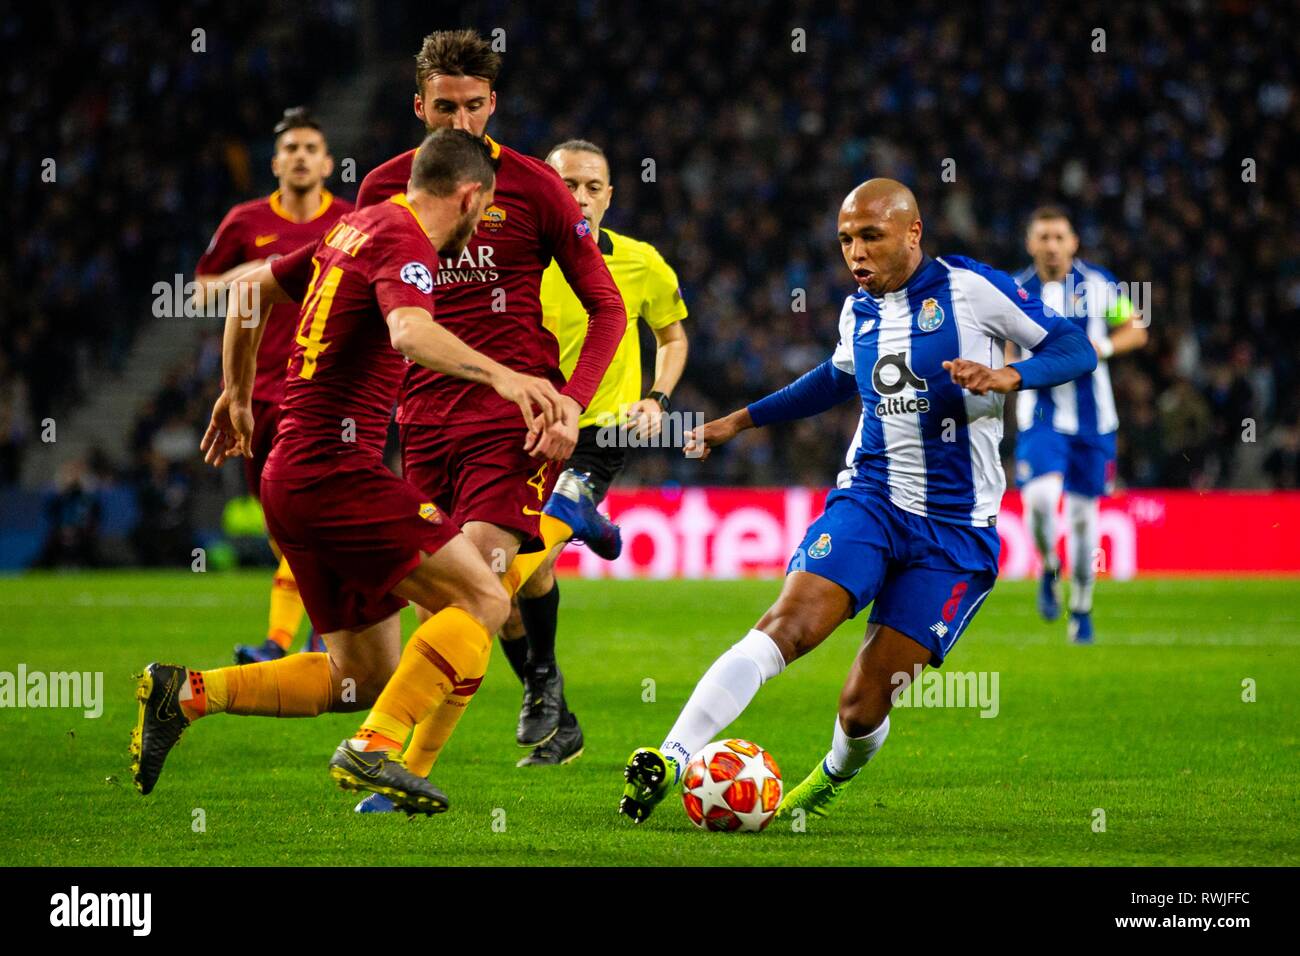 FC Porto's player Yacine Brahimi (R) vies for the ball with AS Roma's player Alessandro Florenzi (L) during the match against AS Roma for the UEFA Champions League round 16th 2nd leg at Dragon Stadium in Porto. Final Score: FC Porto 3-1 AS Roma Stock Photo